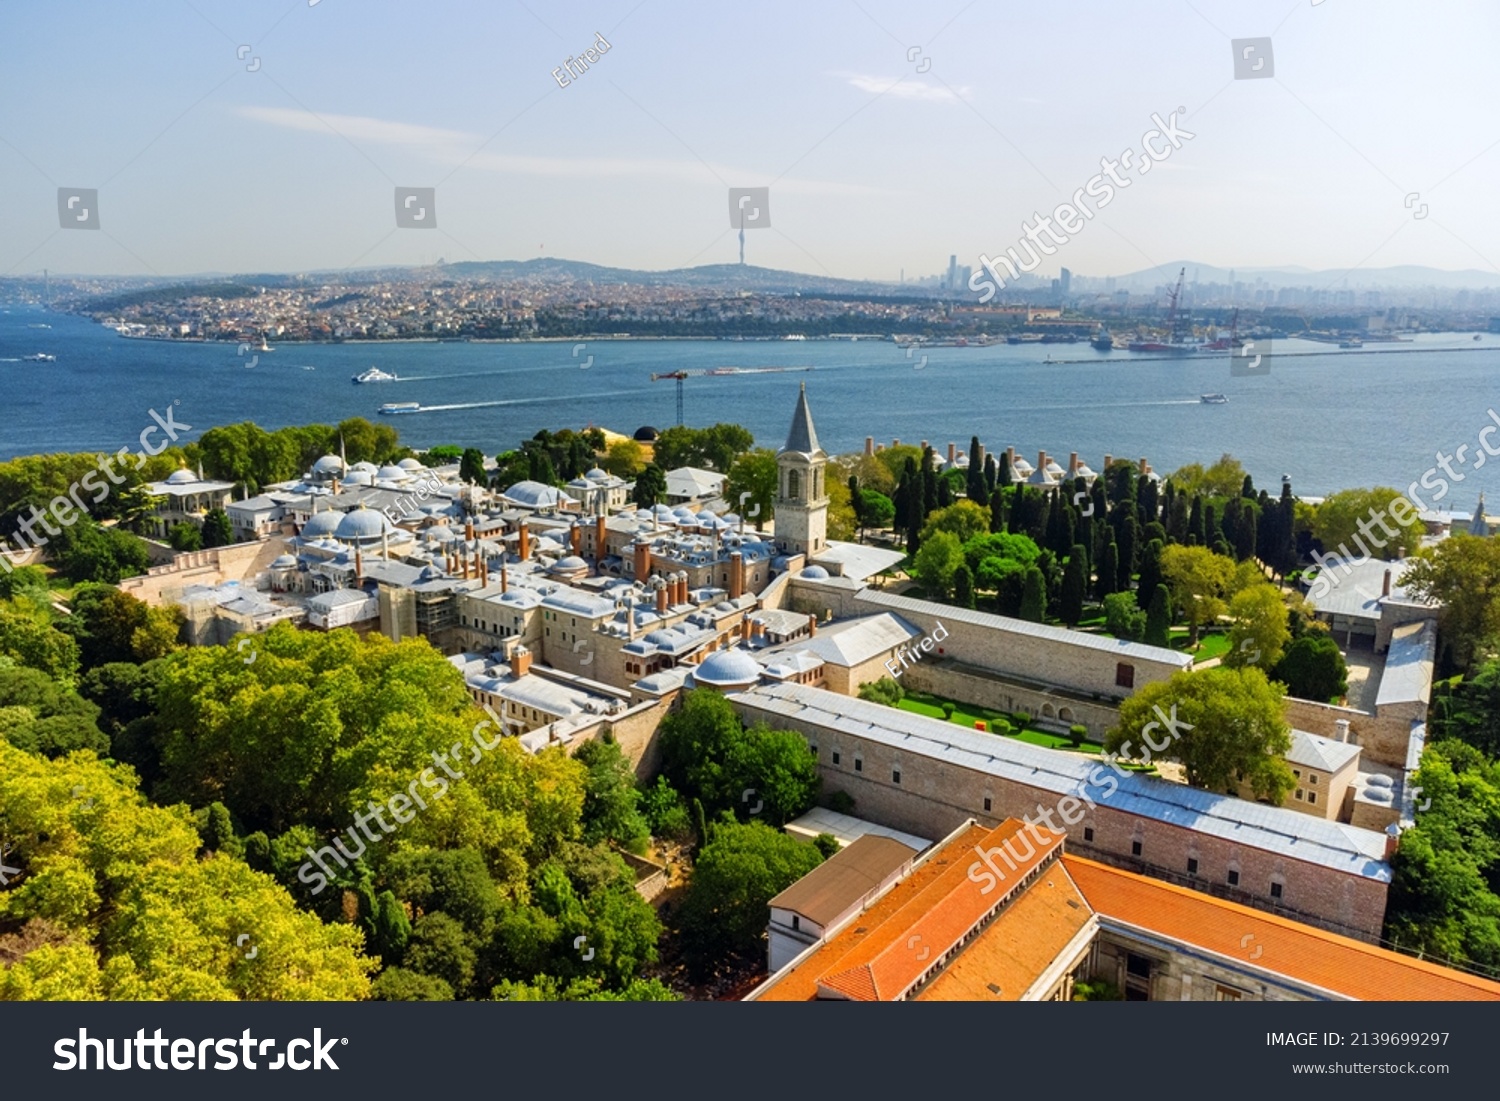 Awesome aerial view of the Topkapi Palace in Istanbul, Turkey. Drone flying over the city. The Bosporus is visible in background. Amazing cityscape. #2139699297